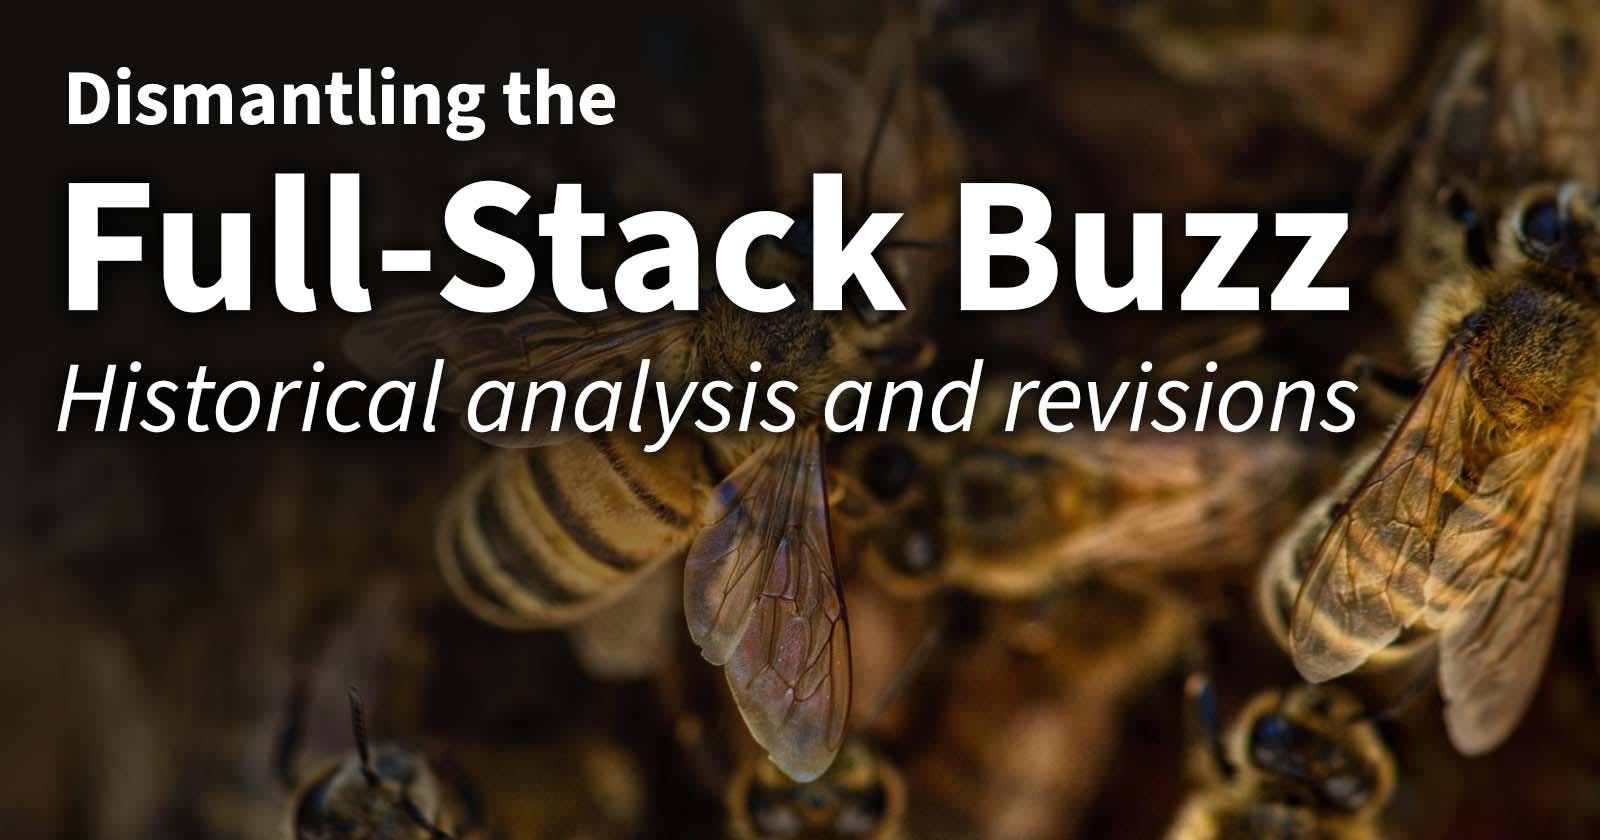 Dismantling the Full-Stack Buzz